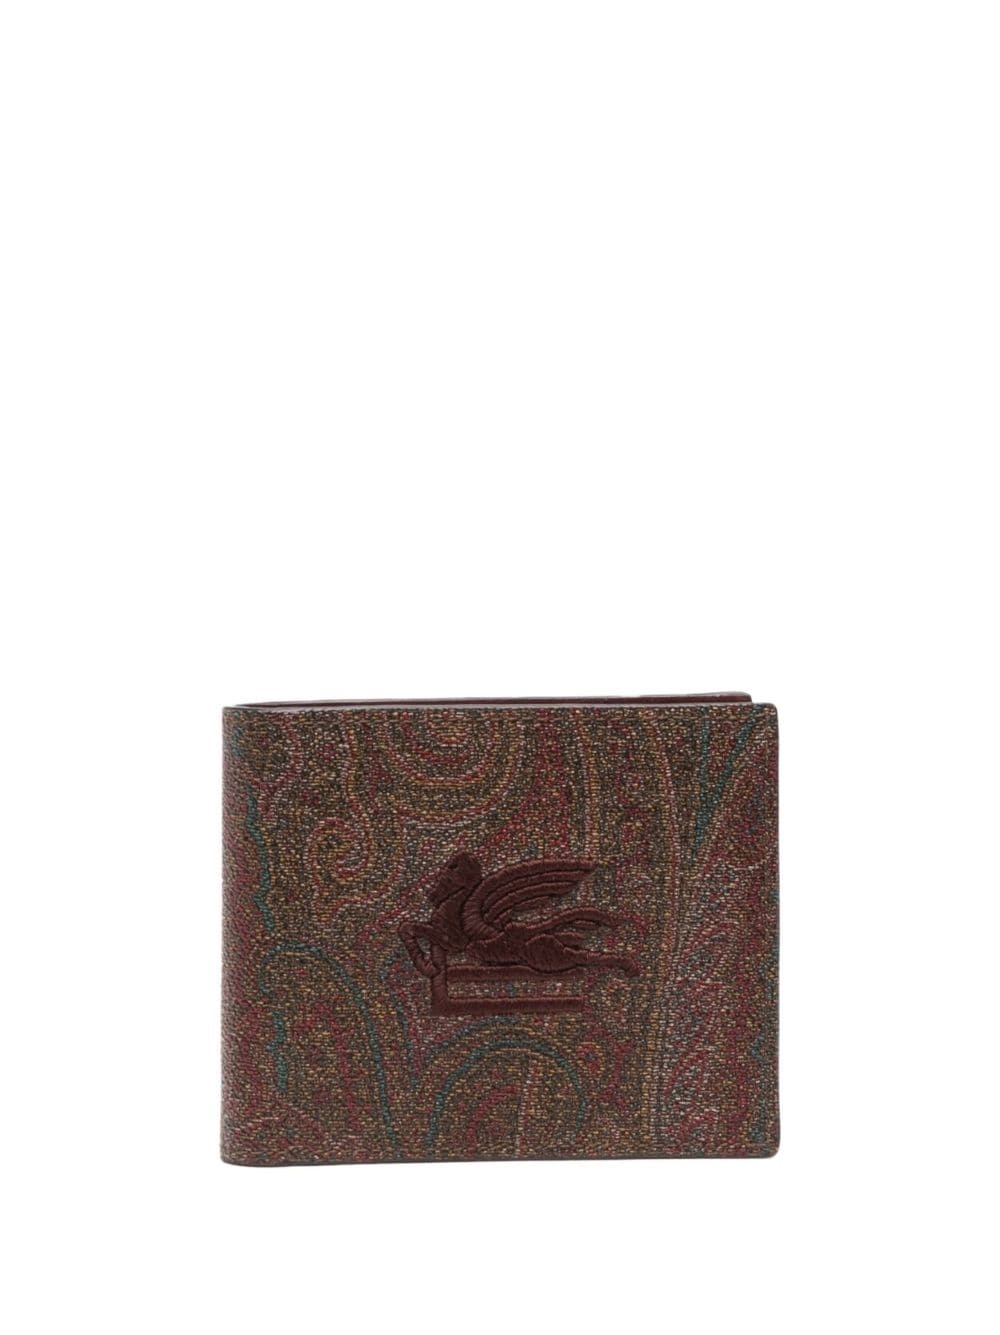 logo-embroidered leather wallet - 1